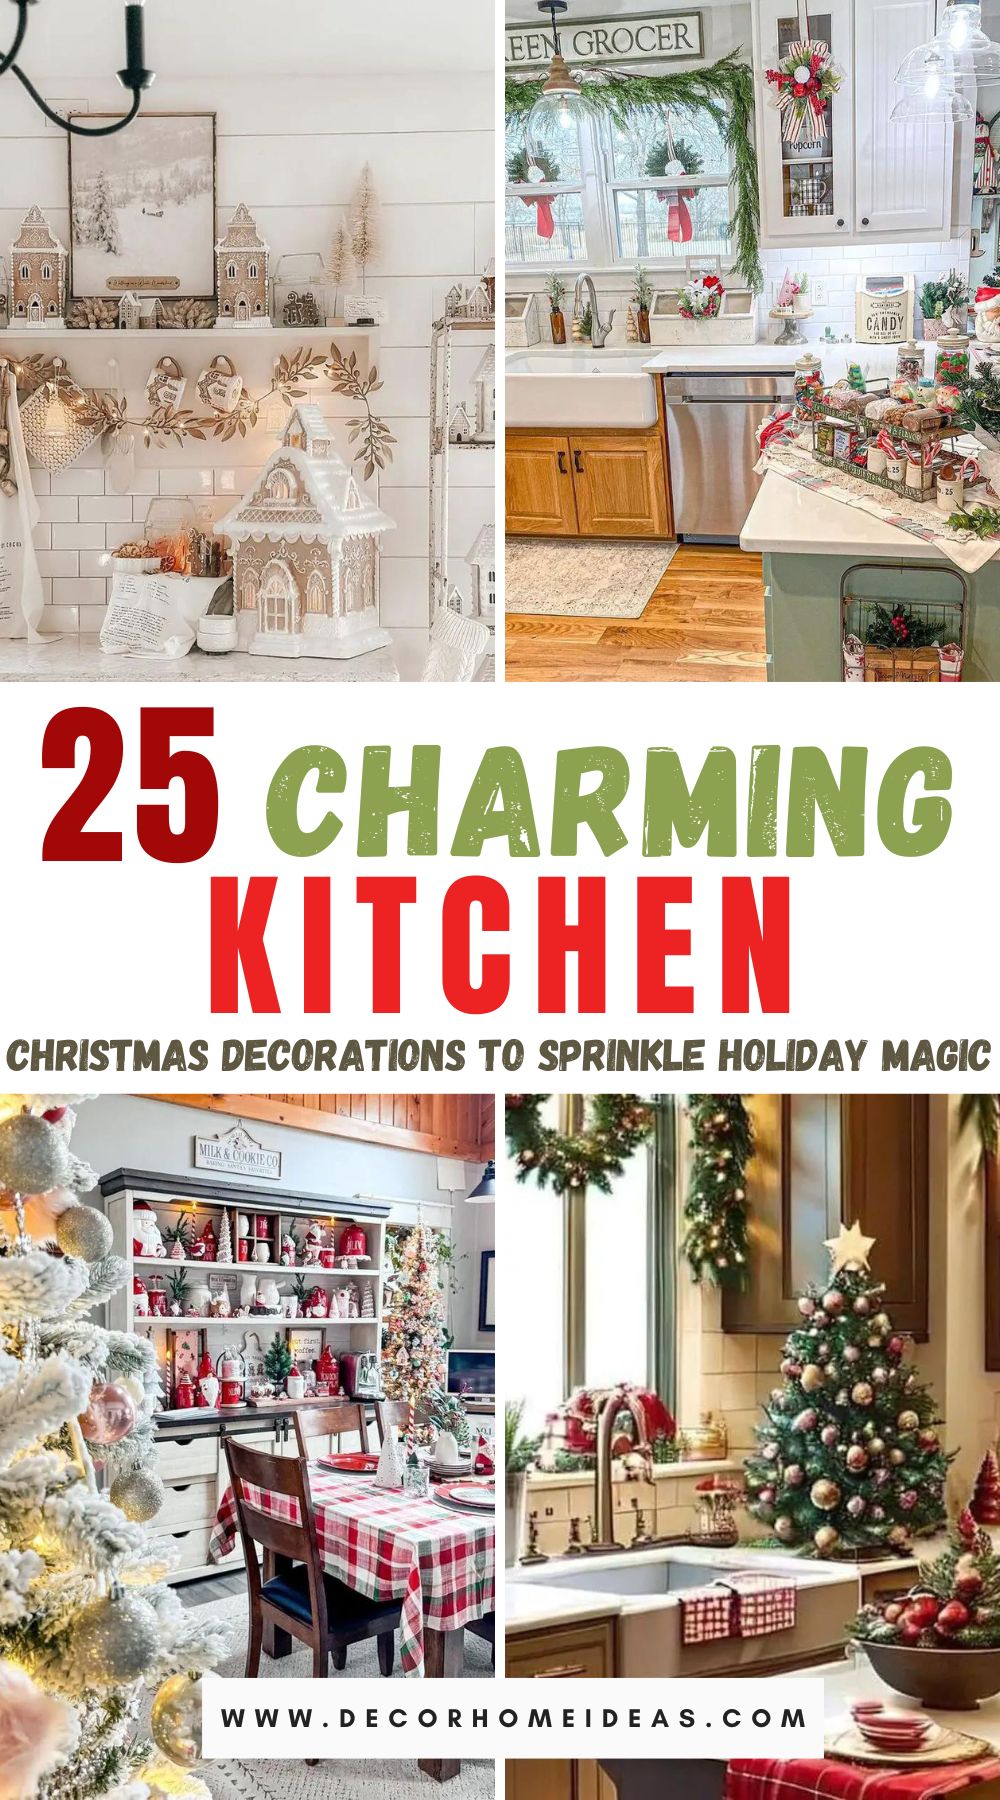 Explore 25 delightful kitchen Christmas decorations that will infuse your cooking haven with festive cheer. From merry wreaths to whimsical ornaments, find inspiration to adorn your kitchen with seasonal warmth and joy.